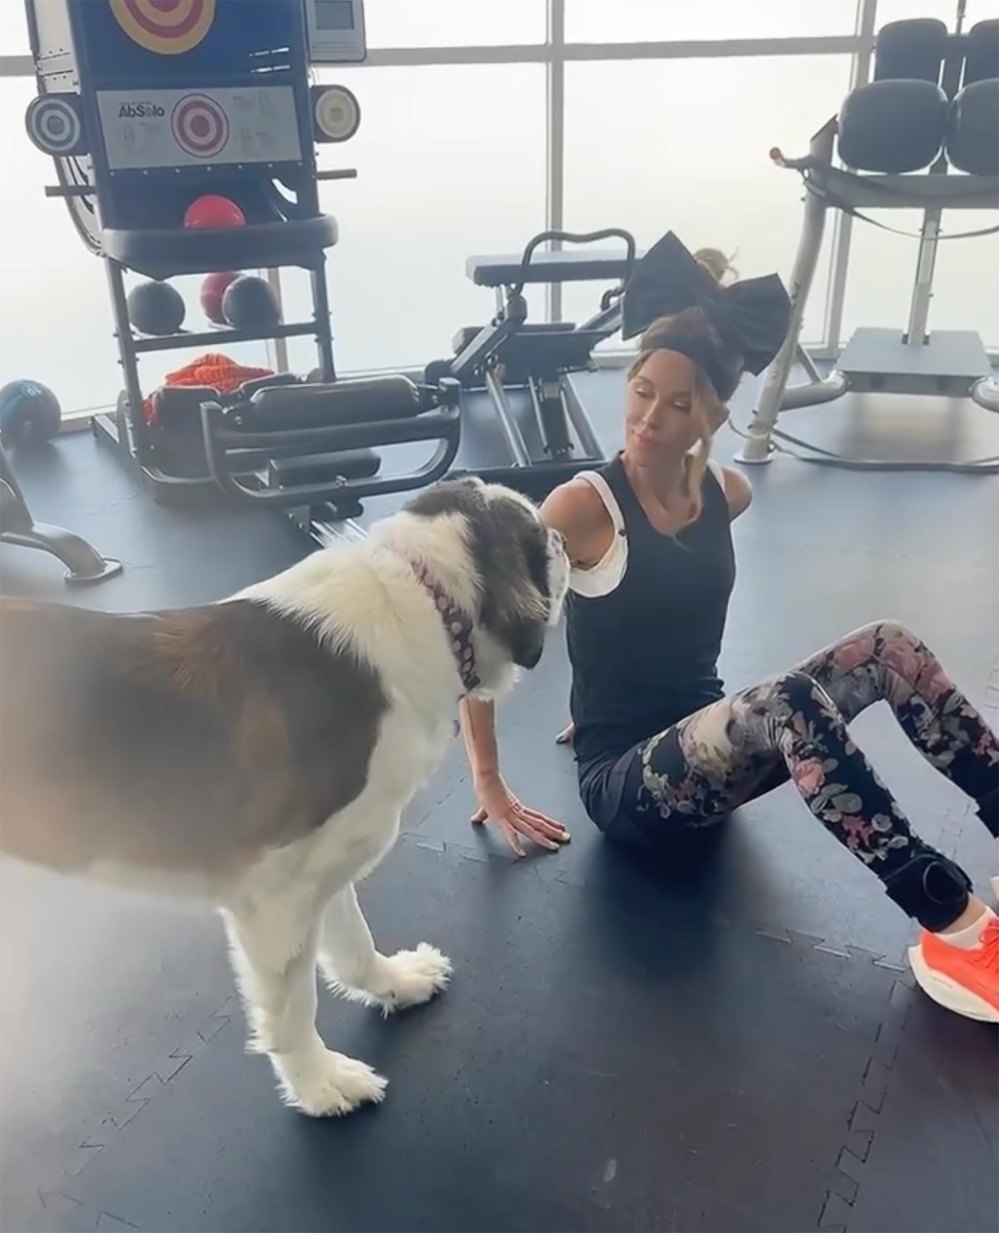 Kate Beckinsale Hits the Gym With a Dog After Hospitalization